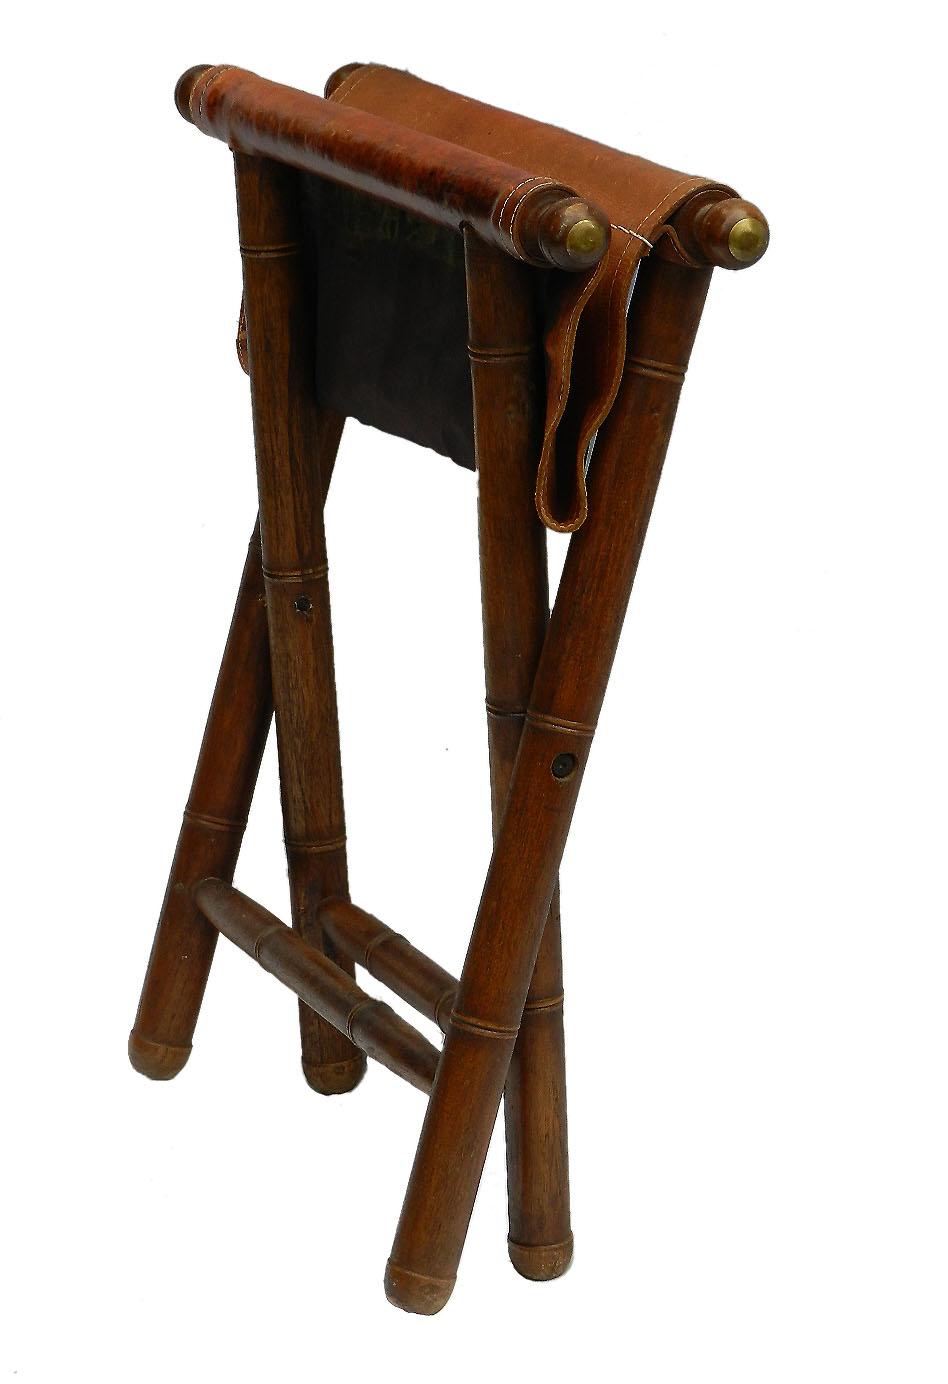 Folding campaign stool oak and leather, circa 1910-1920
Turned oak 'faux bamboo' legs with brass ends
Would make a great landscape artists painting stool
With later replacement leather
In overall good condition with only minor signs of age and